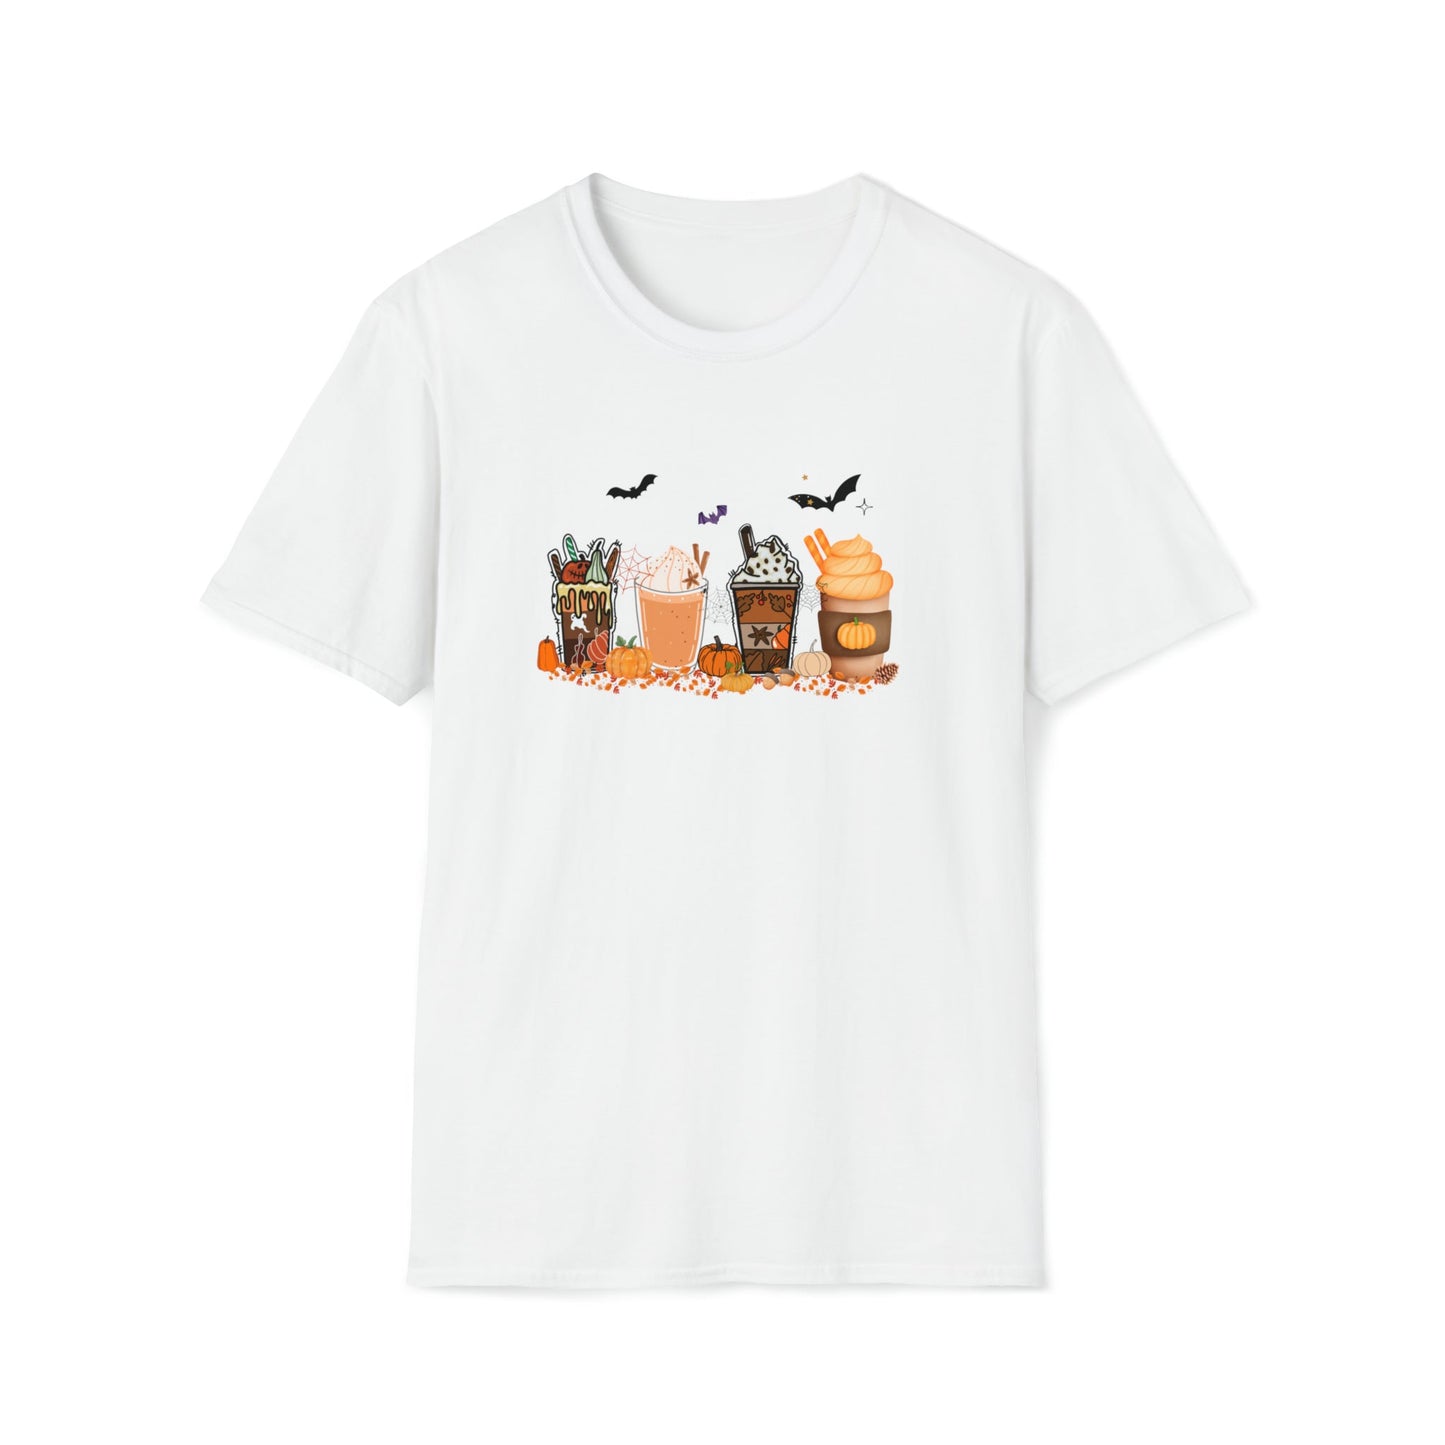 Get trendy with Spooky Drinks  T-Shirt - T-Shirt available at Good Gift Company. Grab yours for $21.95 today!